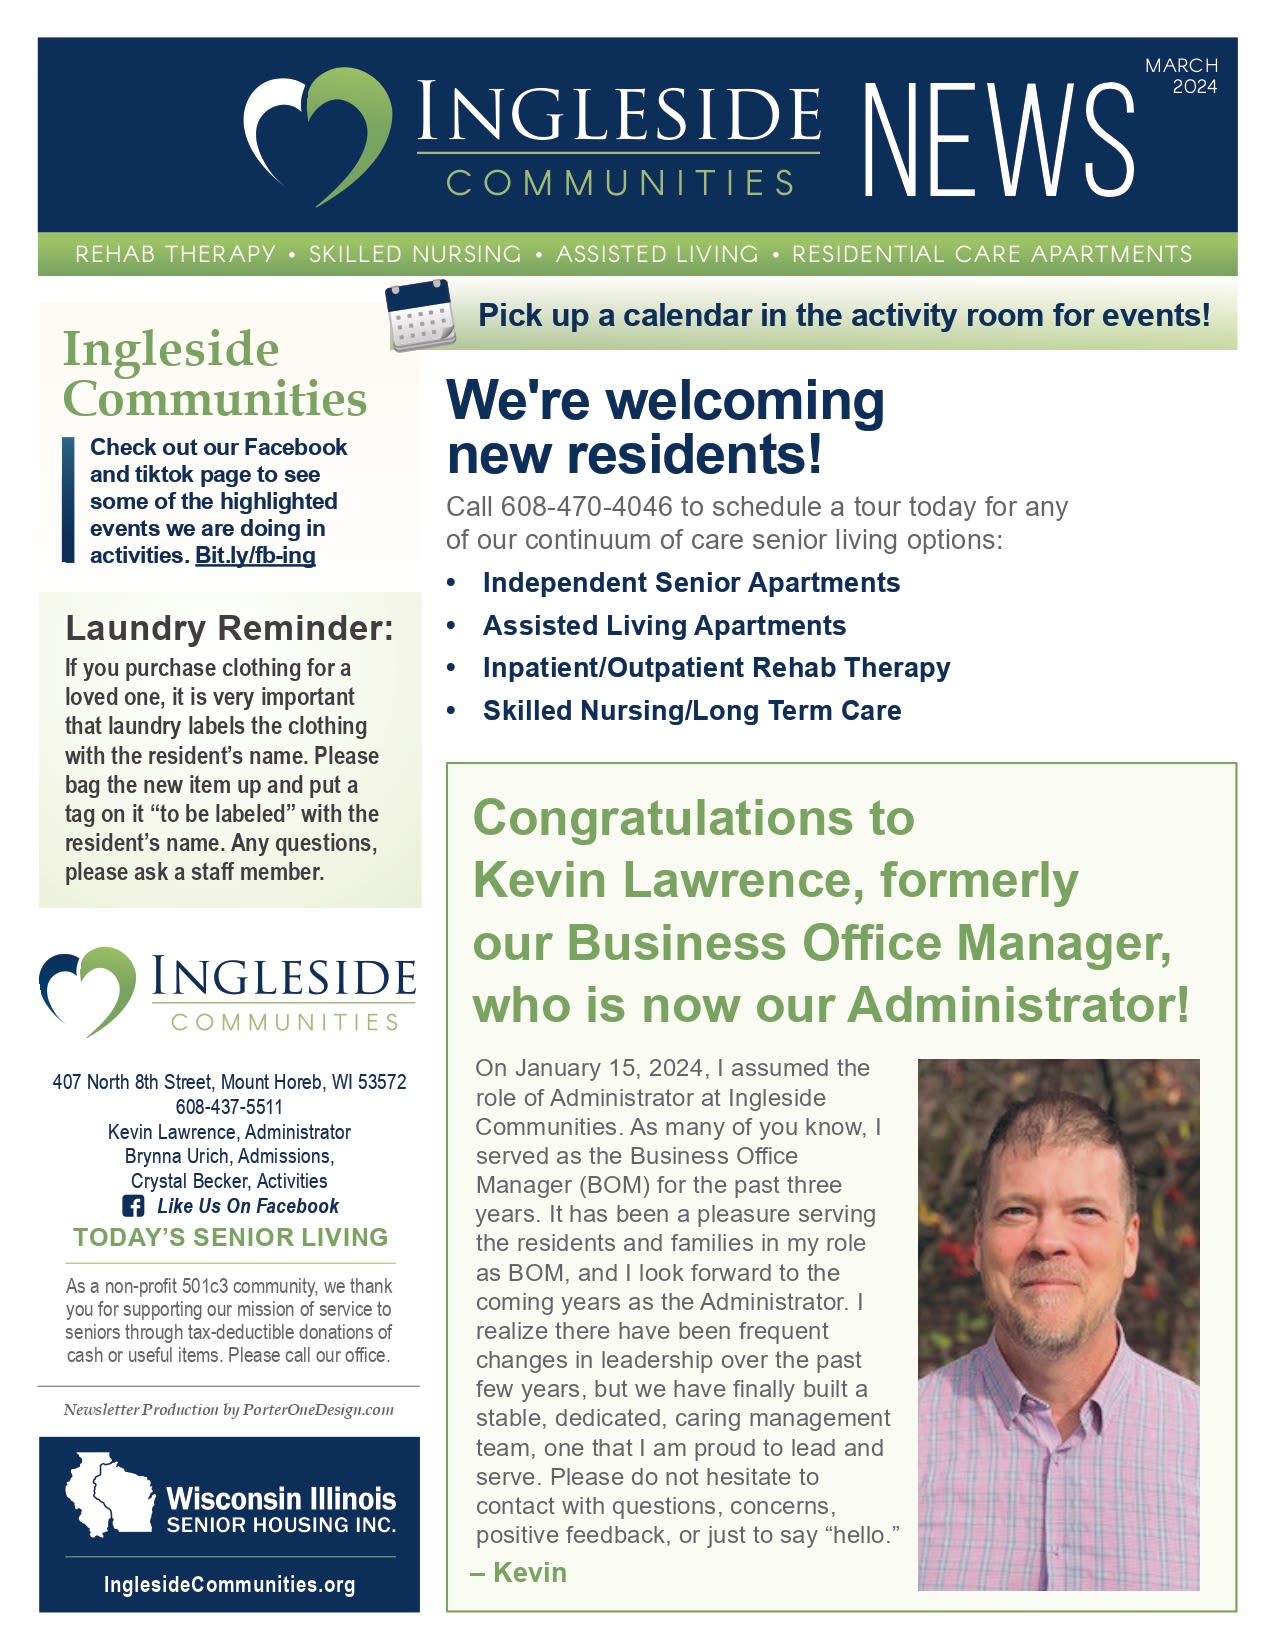 March 2024 Newsletter at Ingleside Communities in Mount Horeb, Wisconsin